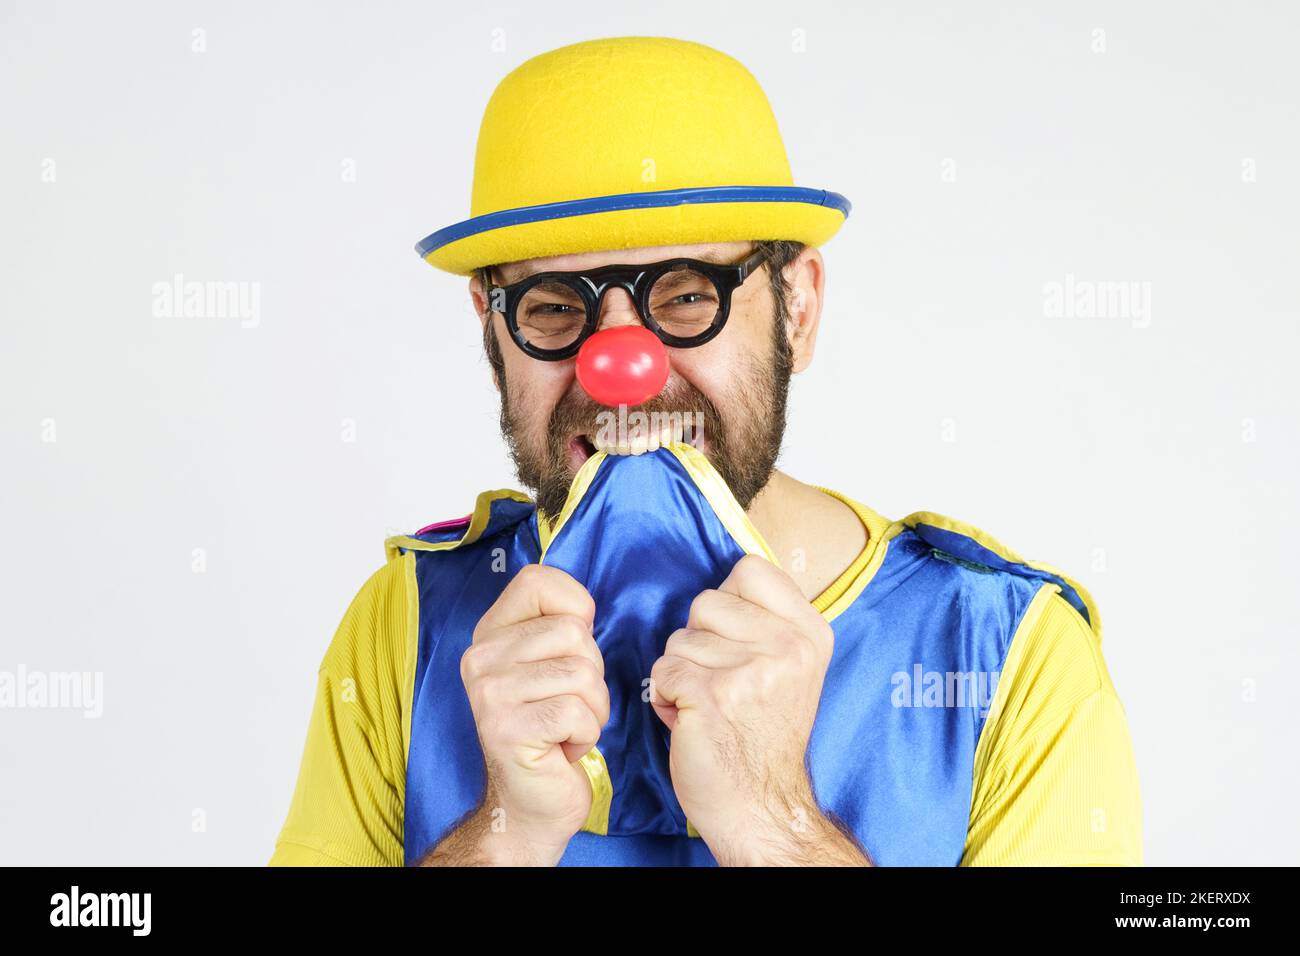 Holiday concept. A clown in a bright blue and yellow suit bites his tie from fright Stock Photo